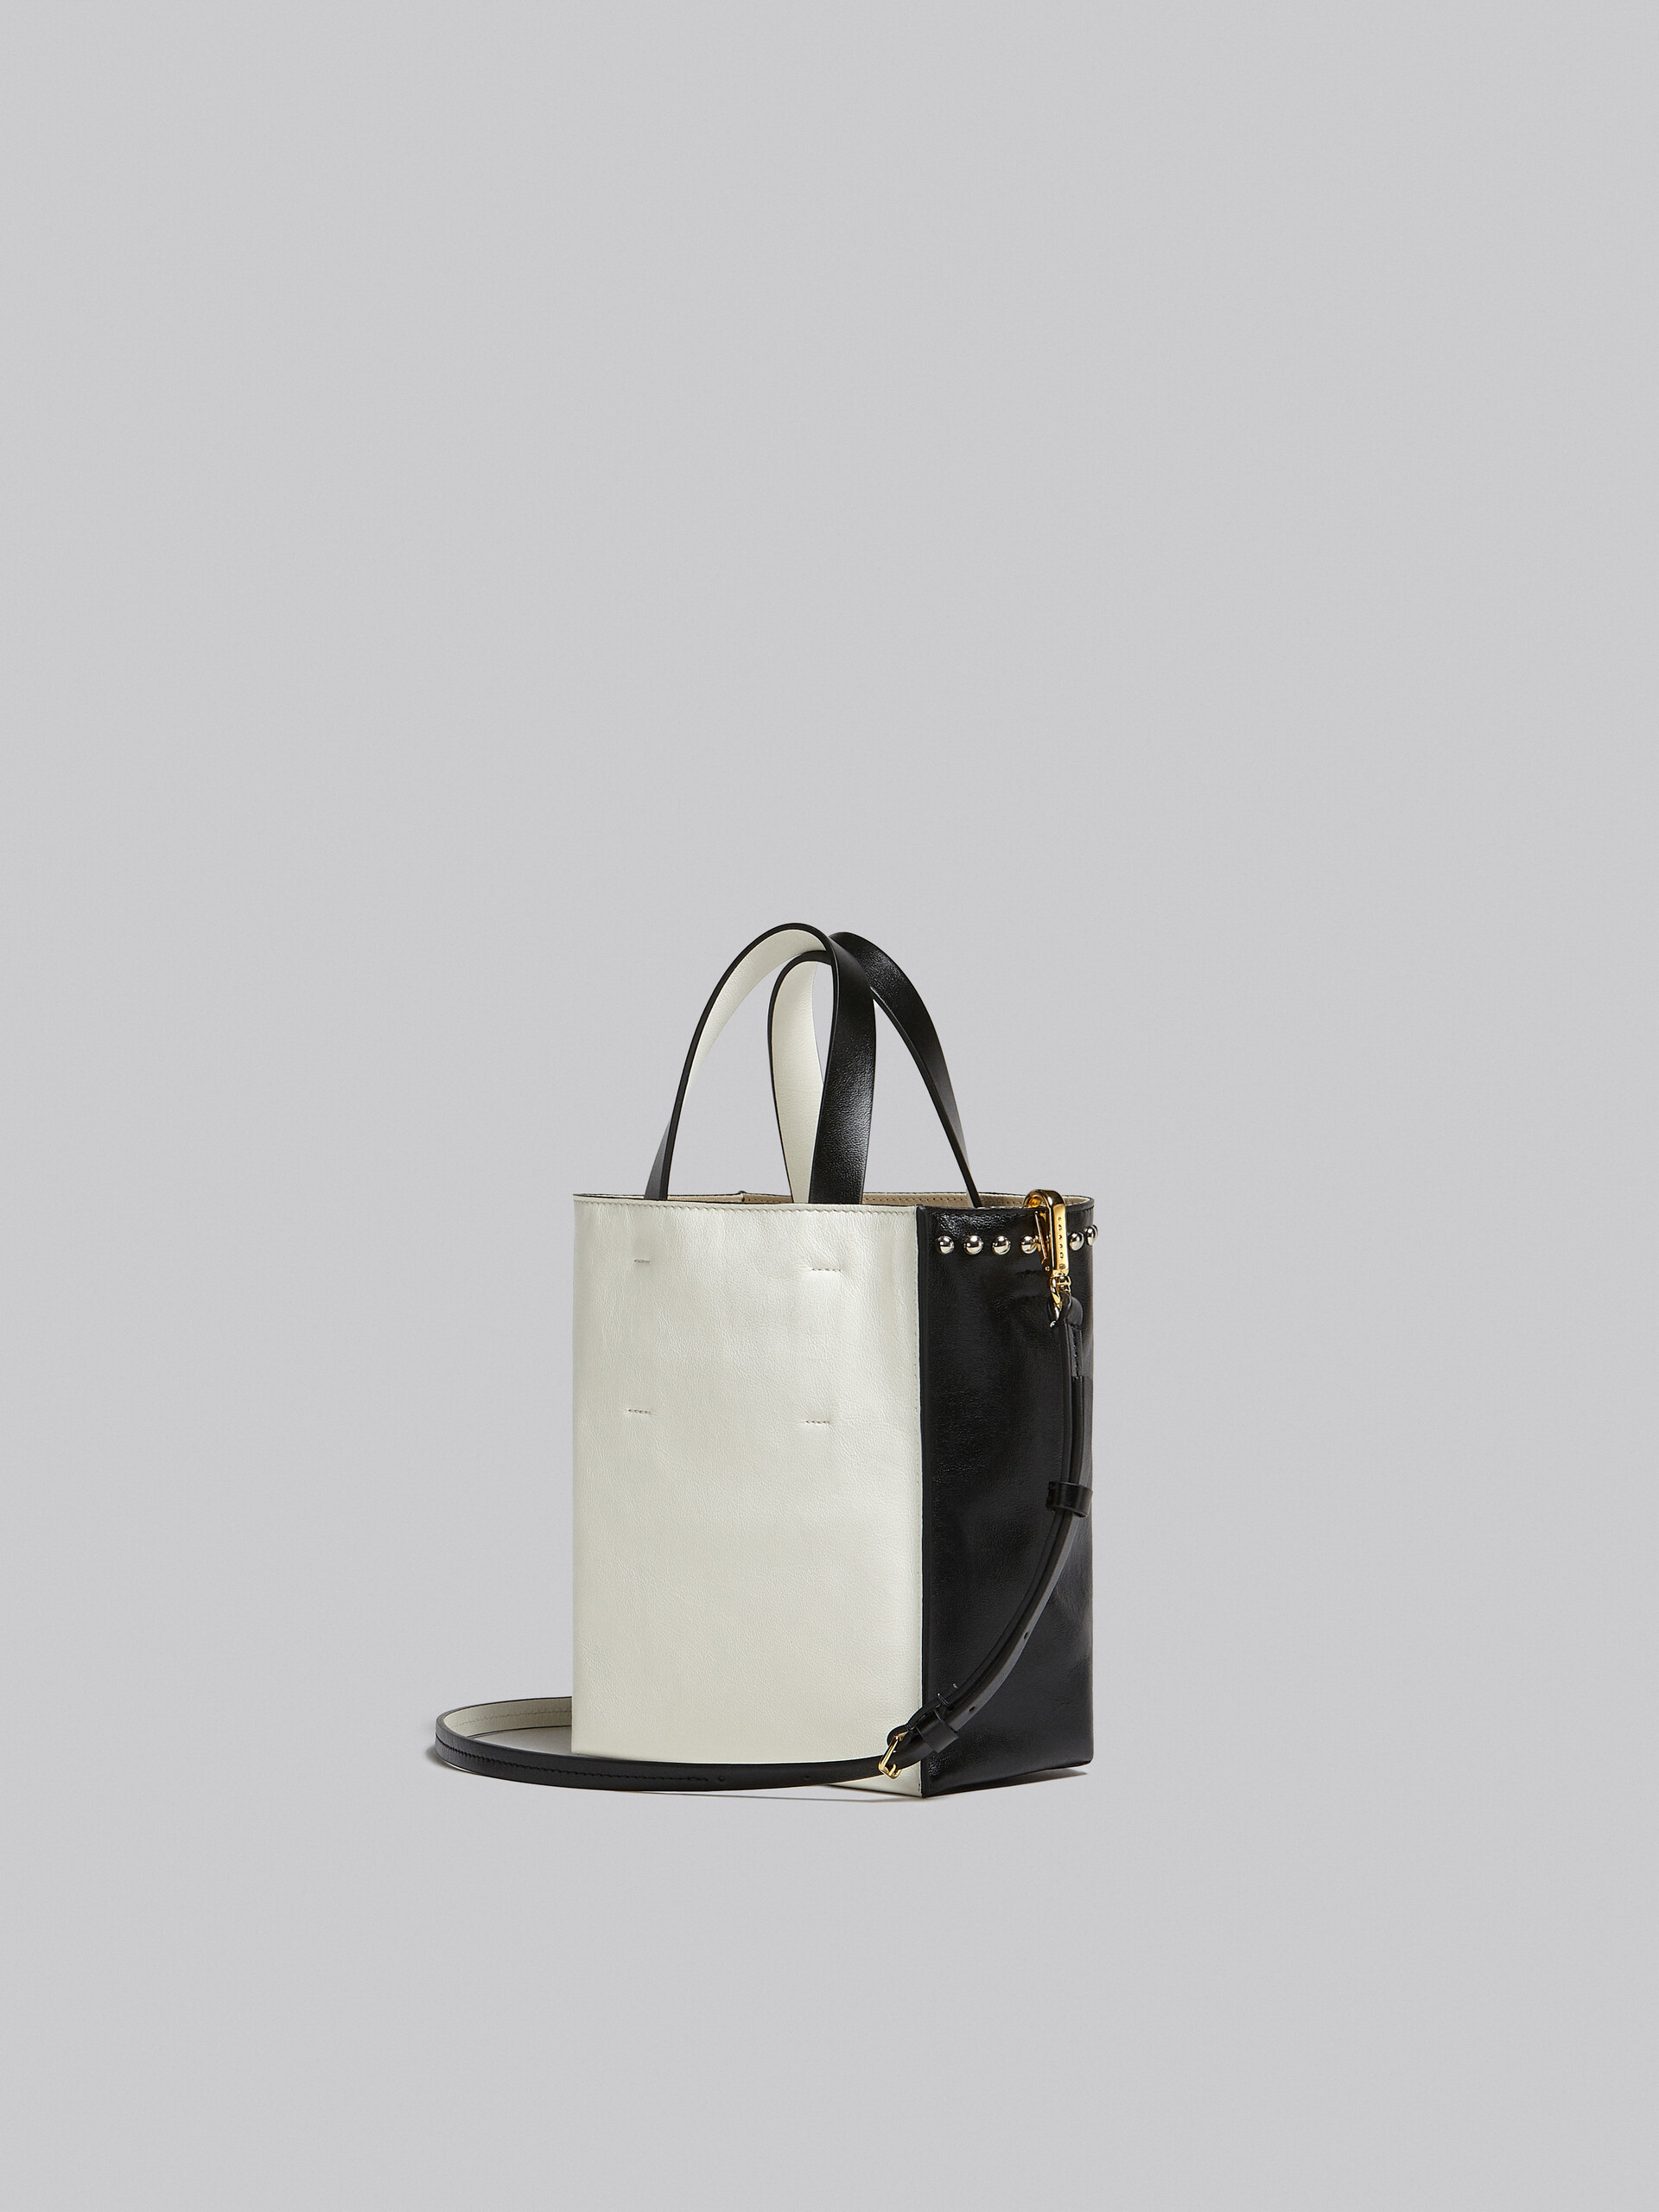 Museo Soft Mini Bag in black and white leather with studs - Shopping Bags - Image 3